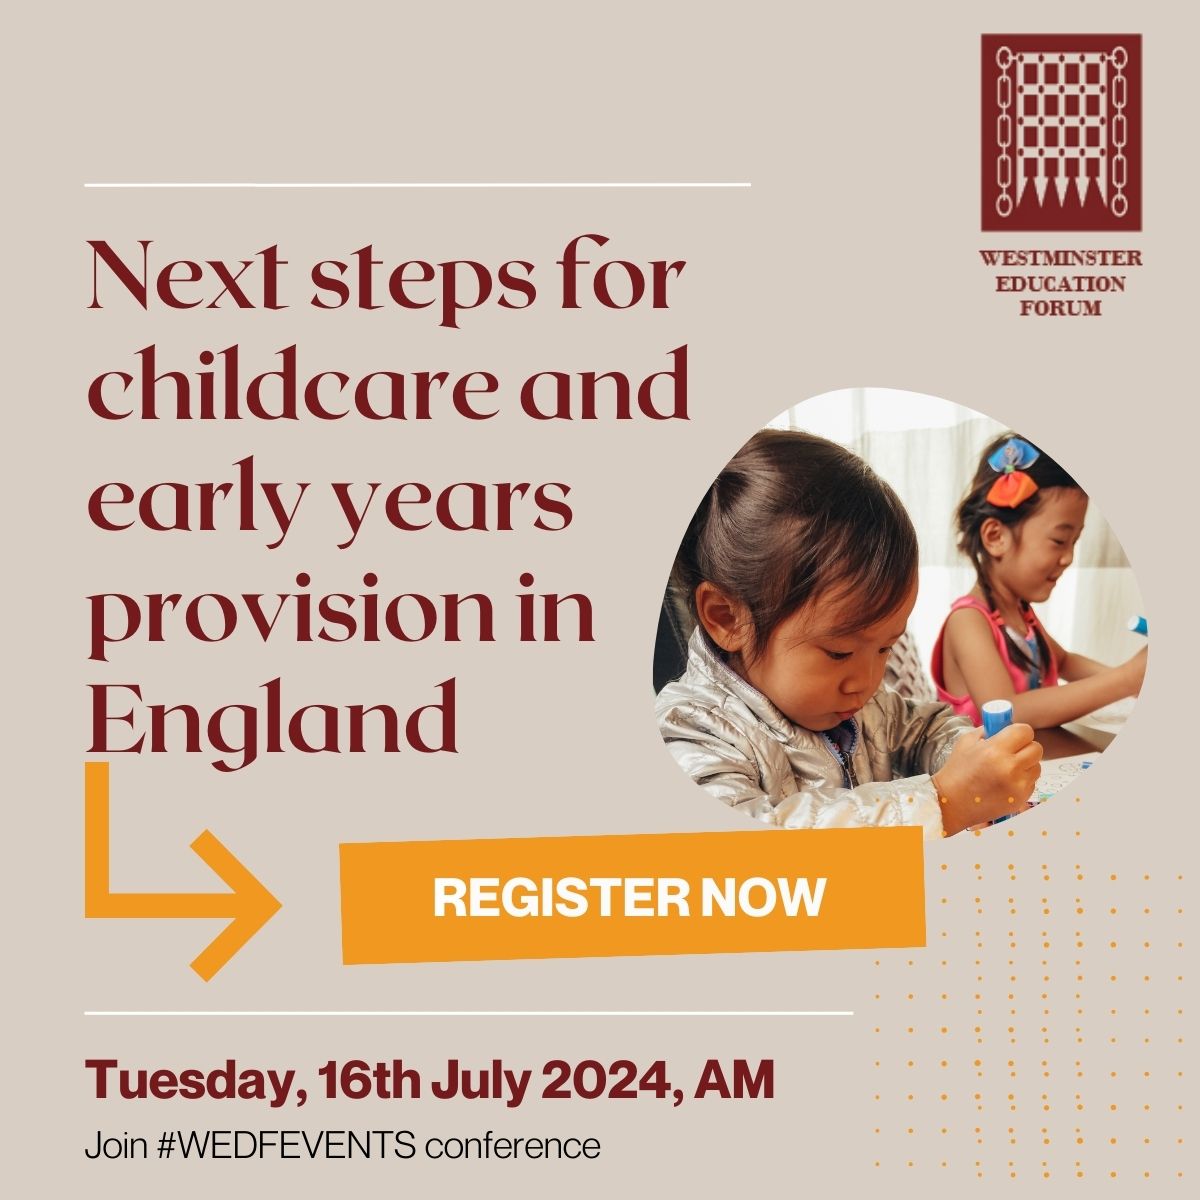 PACEY's Chief Exec, @HelenDonohoe, will be speaking at Westminster Education Forum's online conference on Tuesday 16 July to discuss the next steps for childcare and early education. Find more details here ➡ westminsterforumprojects.co.uk/conference/Ear…